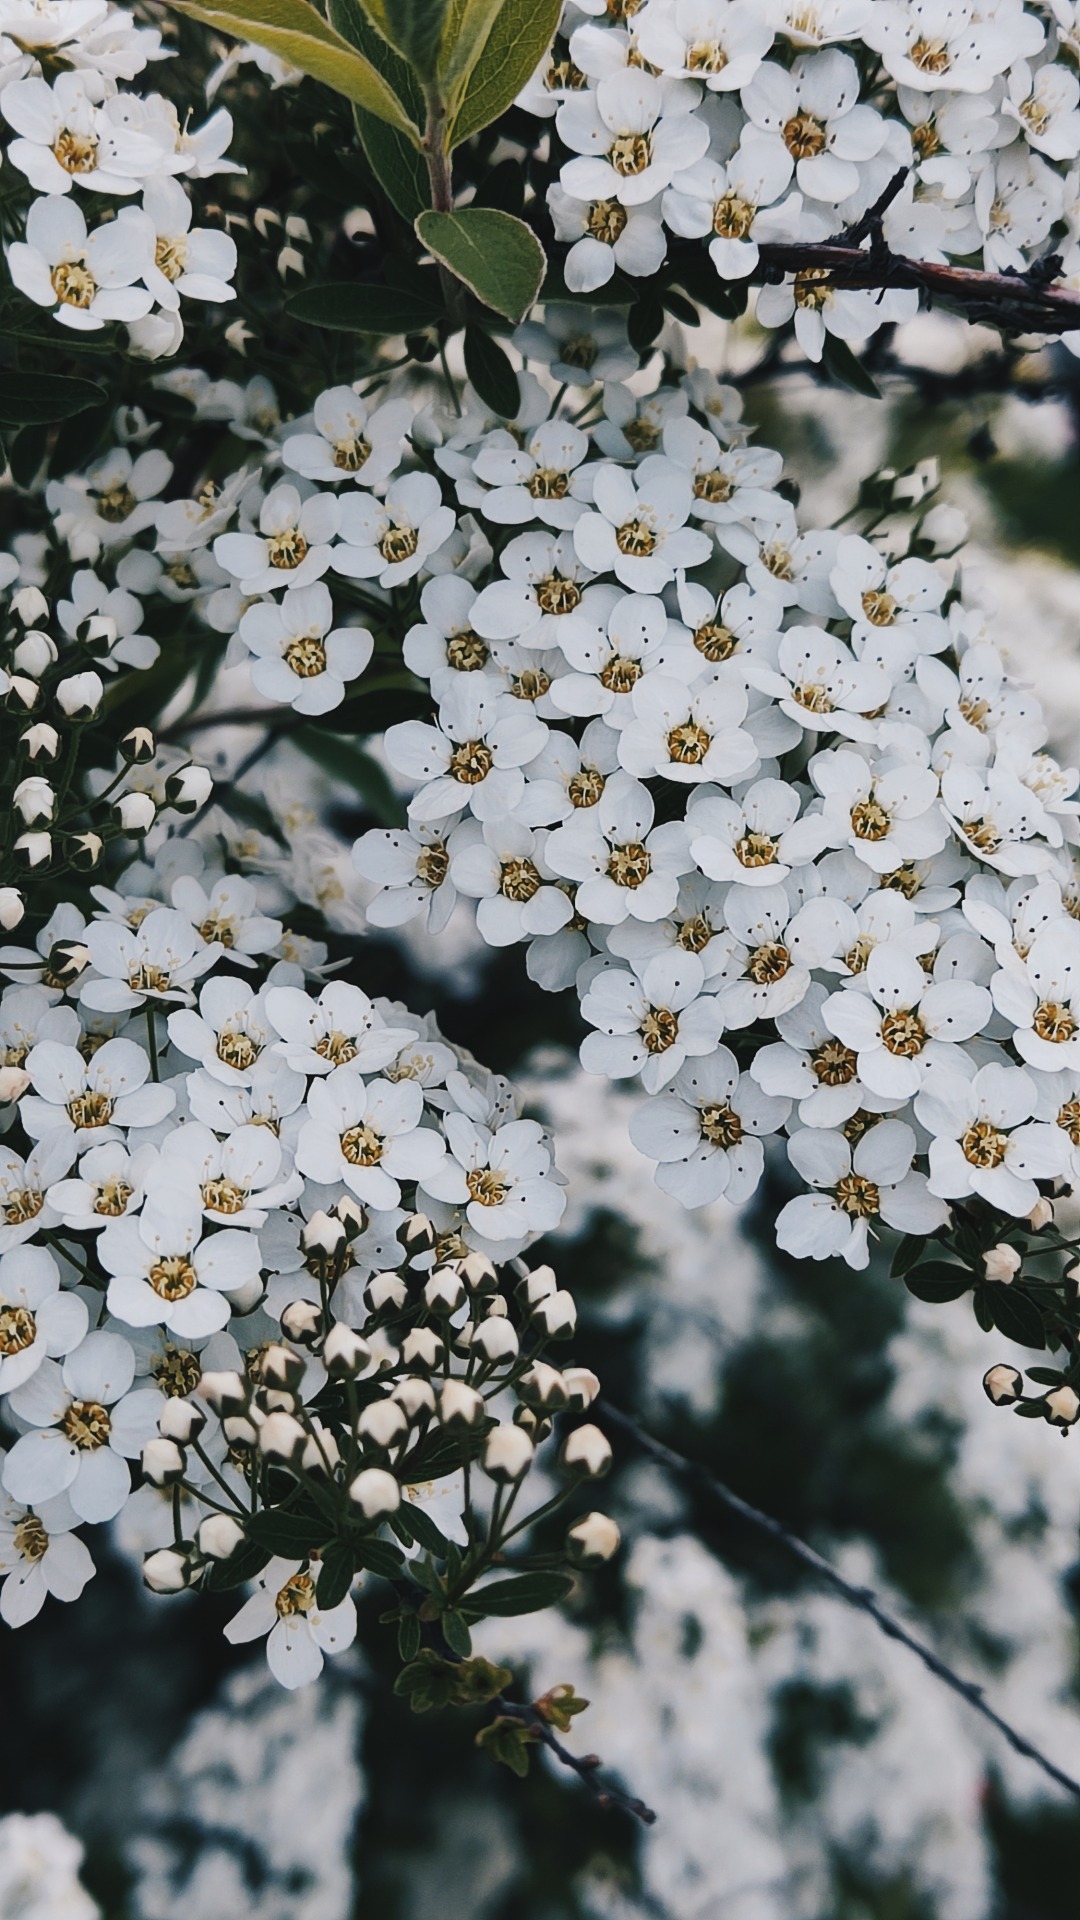 #nature#2022#Russia#photography#spring#May#garden#Blooming#flowers#white#original photographers#vsco#vsco cam#природа#Россия#фото#сад#весна#цветы#май